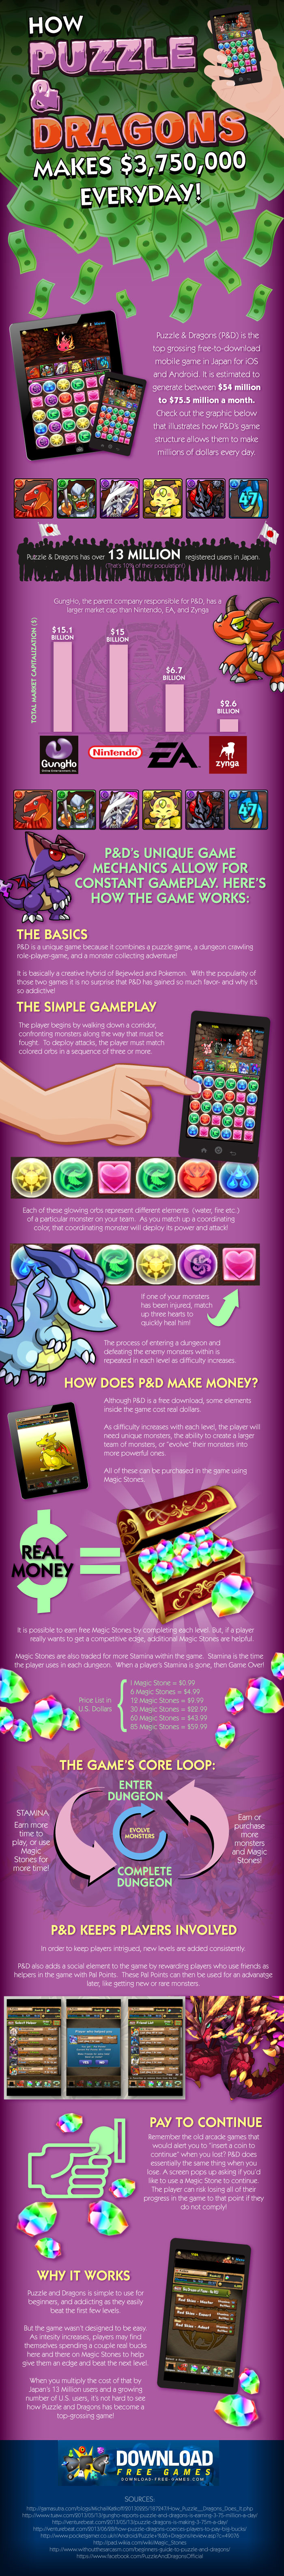 16 how-puzzle-dragons-makes-millions-everyday_large